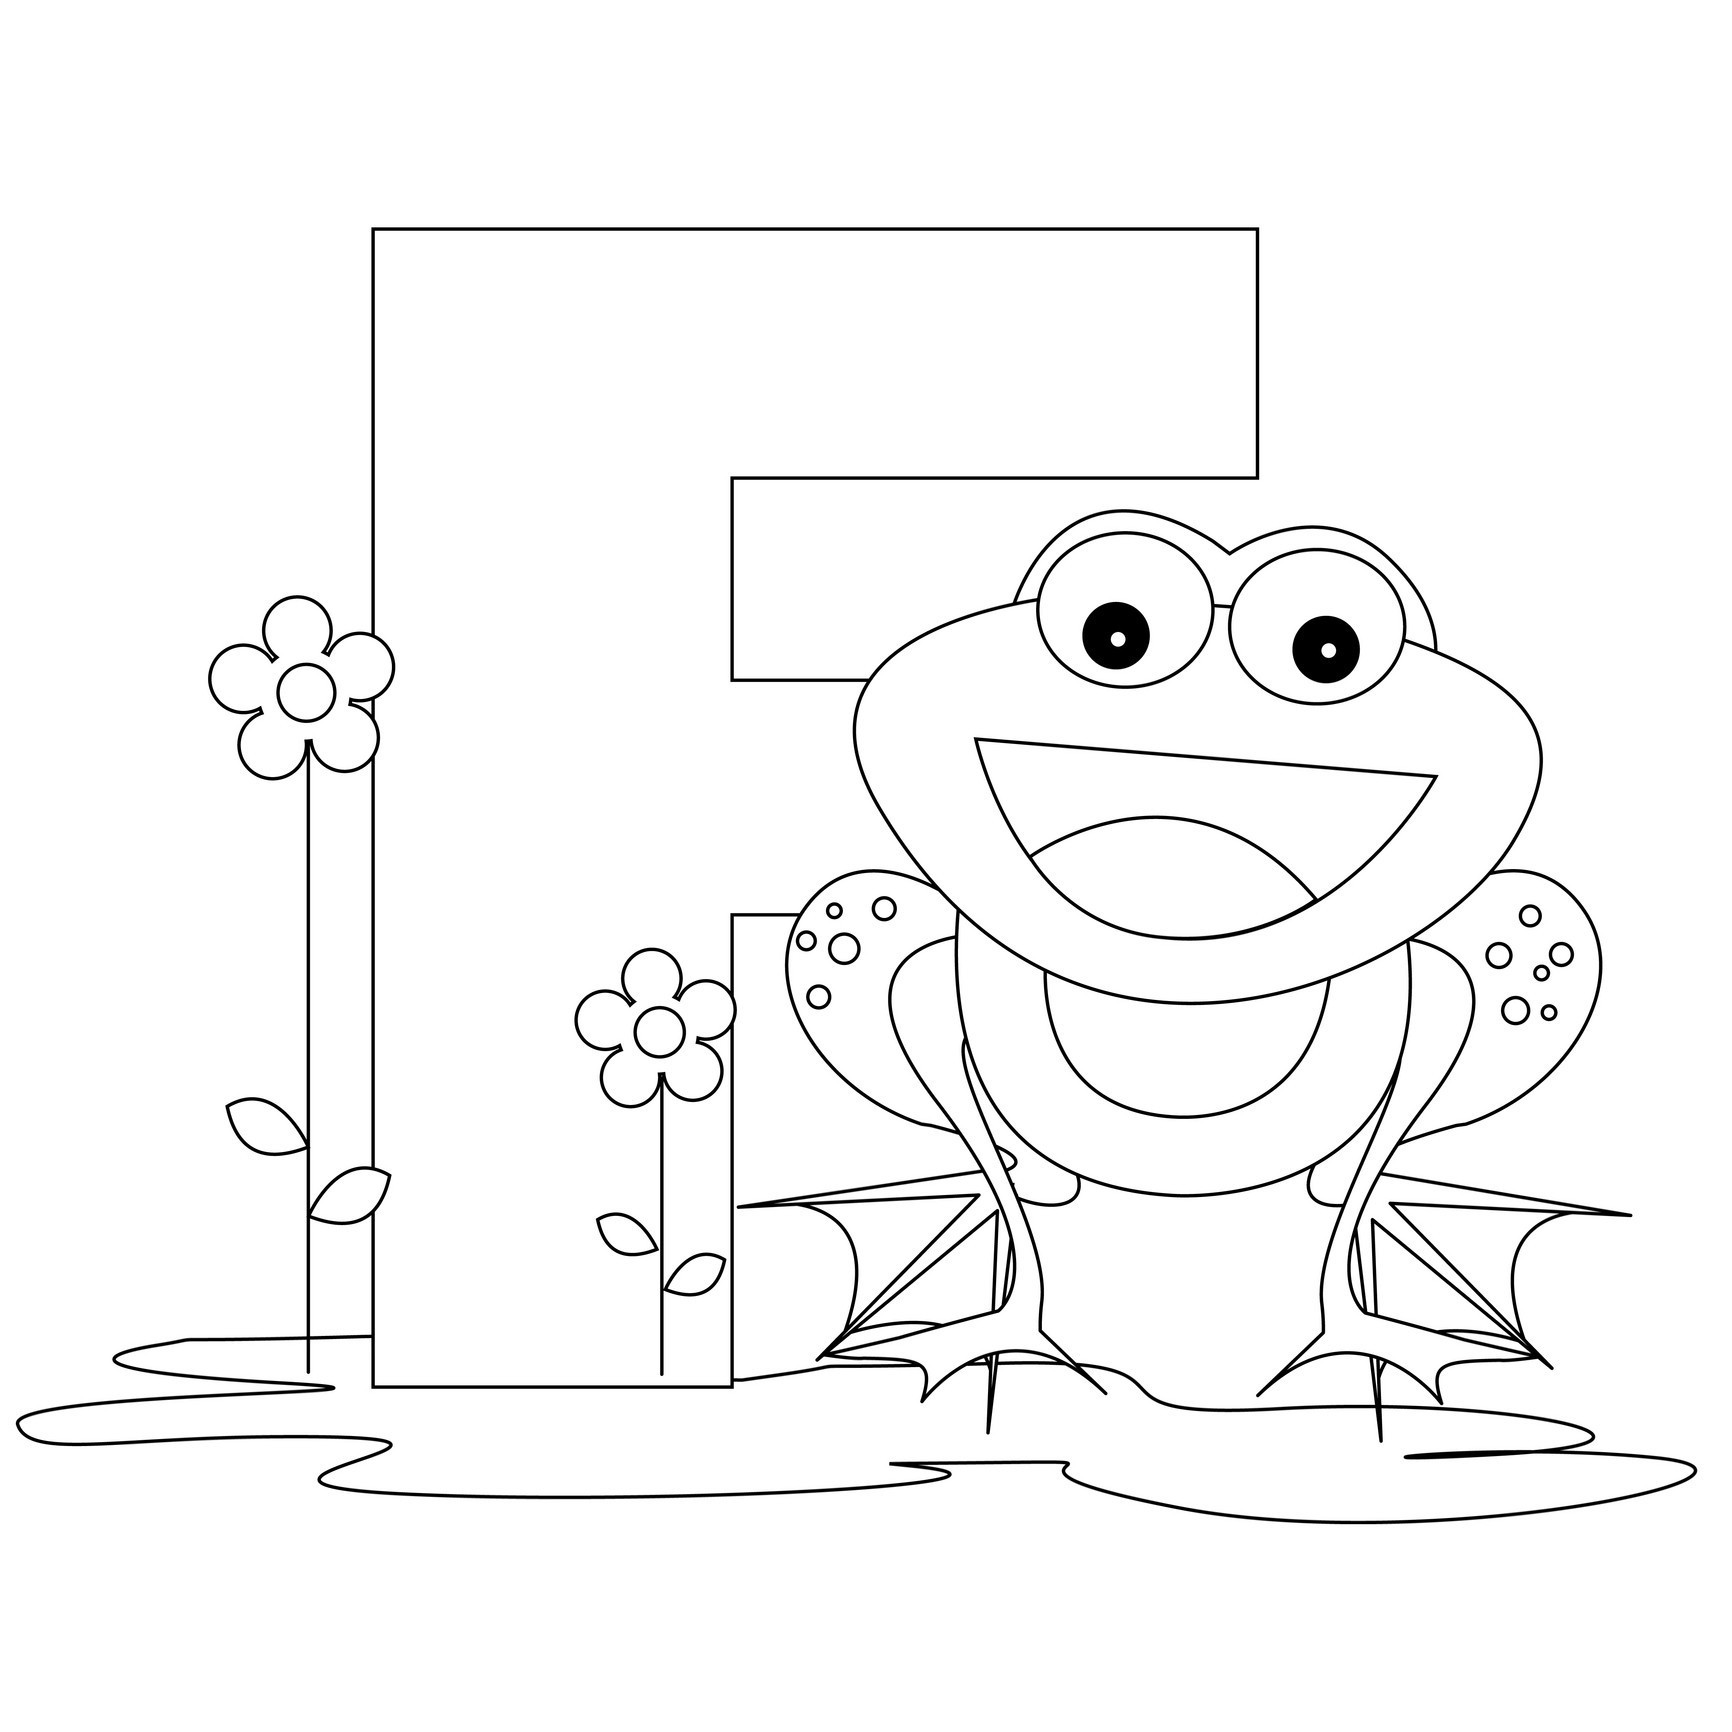 Abc Coloring Pages For Toddlers
 Free Printable Alphabet Coloring Pages for Kids Best